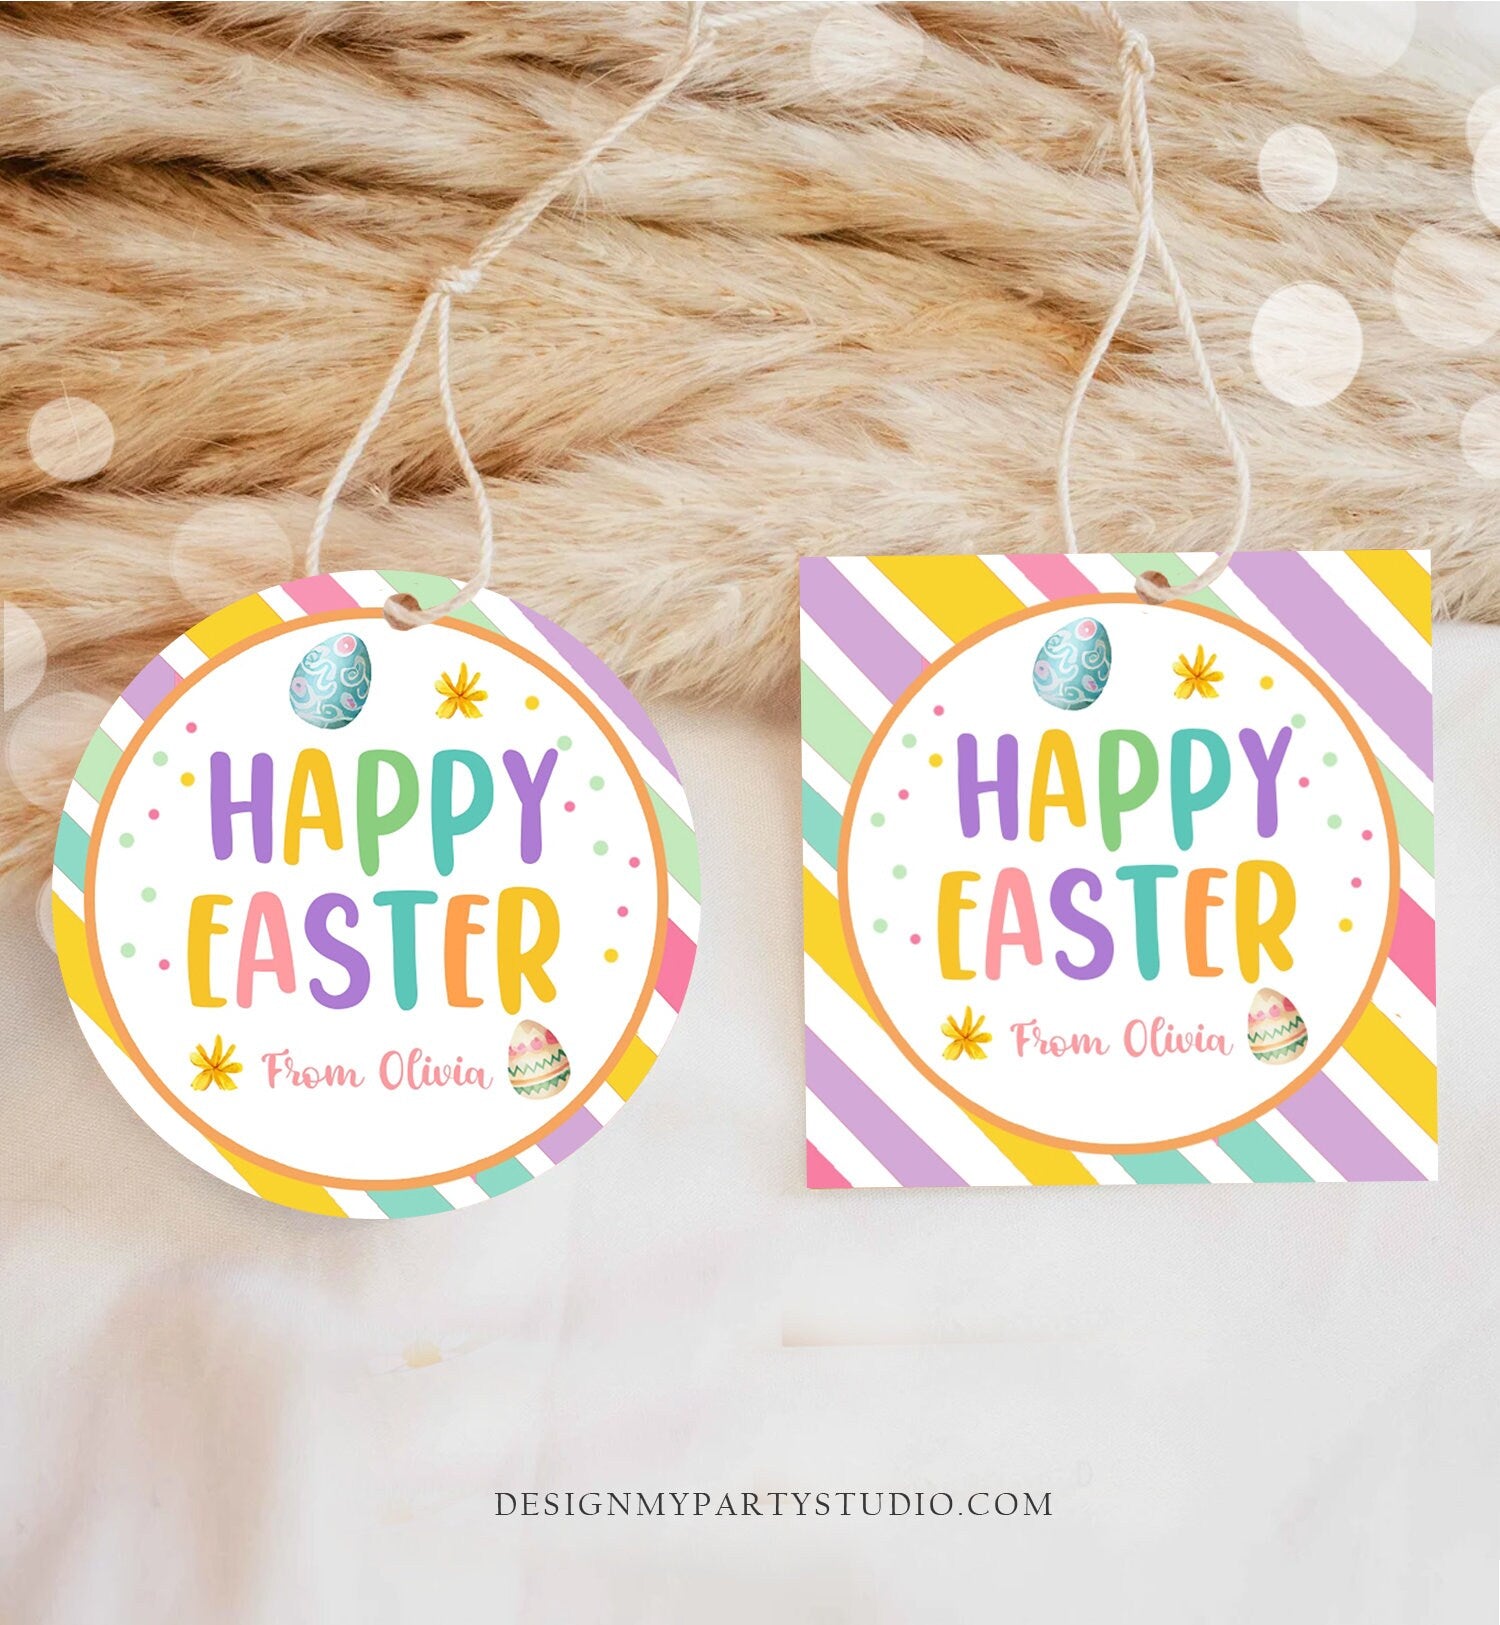 Editable Easter Gift Tags Happy Easter Teacher Appreciation Classroom Favor Tag Easter Egg Easter Treat Cookie Tag Digital PRINTABLE 0449